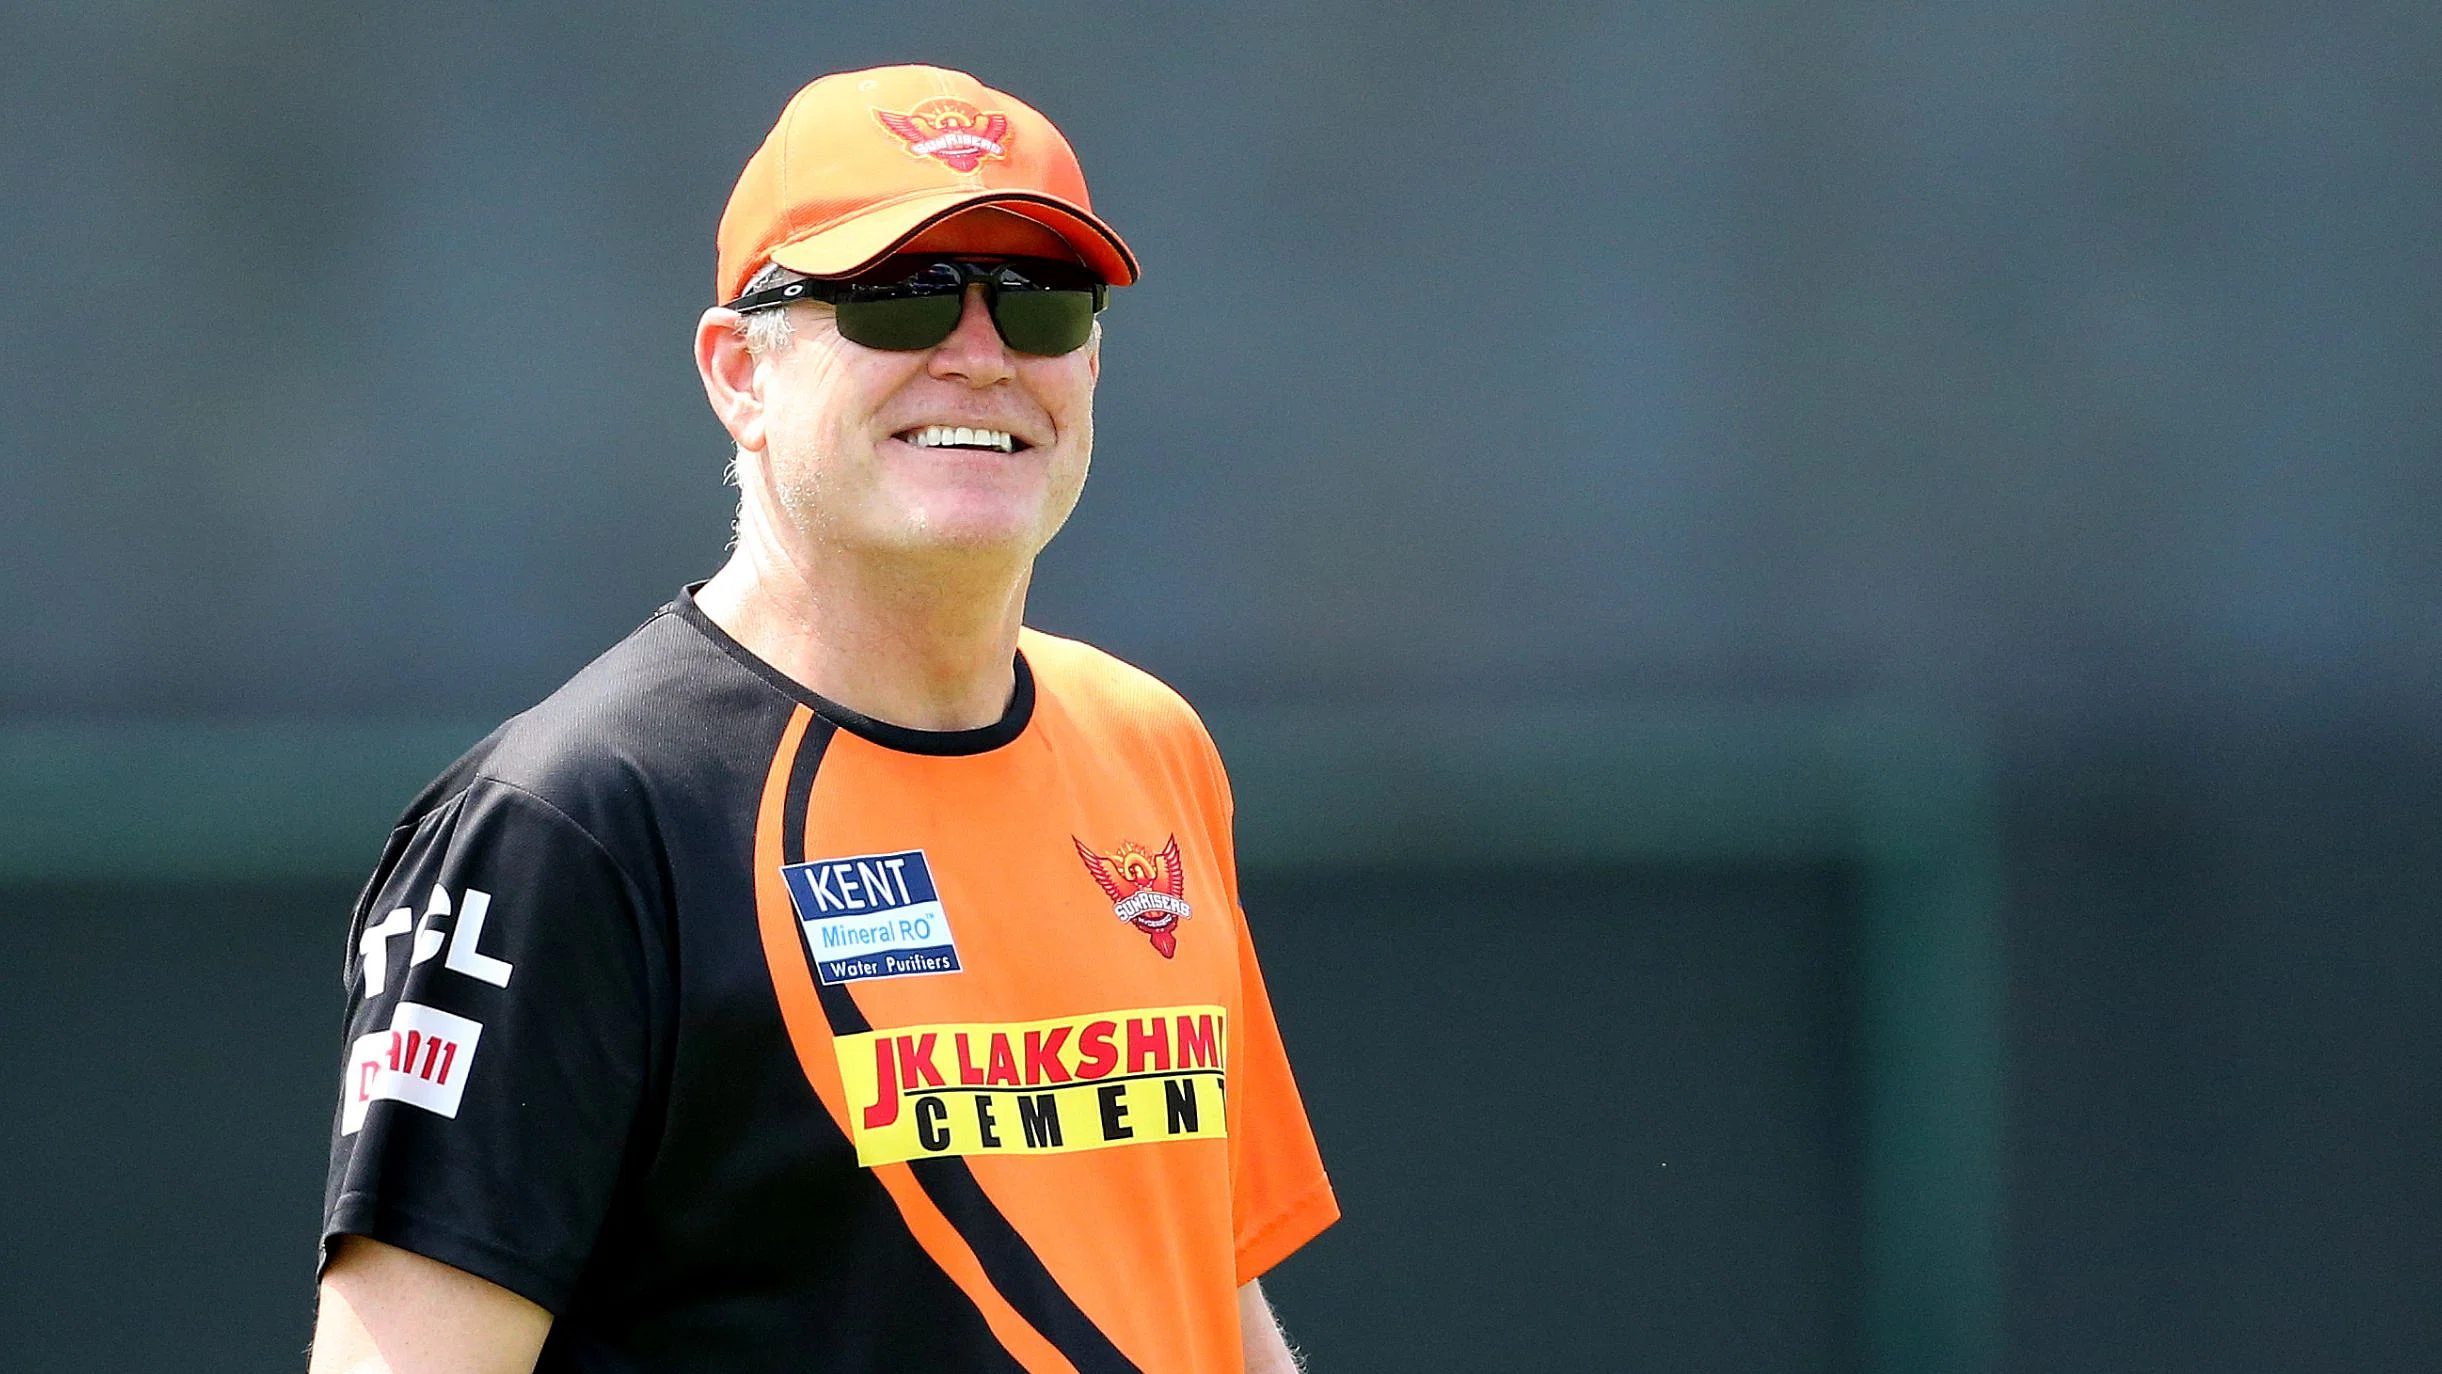  /></p>
<p>Former Australia cricketer and well-known coach Tom Moody has reportedly set his sights on the high-profile job of the Indian cricket team’s head coach.</p>
<p>56-year-old Moody is currently serving as Sunrisers Hyderabad (SRH) Director of Cricket in the Indian Premier League (IPL) and Sri Lankan team’s Director of Cricket.</p>
<p>The 1987 and 1999 World Cup-winning all-rounder has expressed his desire to be the next head coach of Team India, though; he had previously applied for the top post in 2017 and 2019, but the former all-rounder was never considered for the job.</p>
<p>With Ravi Shastri’s contract as India’s head coach set to end after the conclusion of the upcoming ICC T20 World Cup 2021, Moody is expected to apply for the high profile job, as Shastri has already confirmed that he won’t be seeking an extension.</p>
<p>A Foxsports.com.au report stated: <em>“It’s understood the former World Cup-winner and well-traveled coach is eyeing the Indian coaching job, which is set to be vacated by (Ravi) Shastri following the impending T20 World Cup.”</em></p>
<p>Moody coached SRH for seven years from 2013 to 2019 and led the franchise to their only IPL title in 2016 with then skipper David Warner.</p>
<p><img decoding=